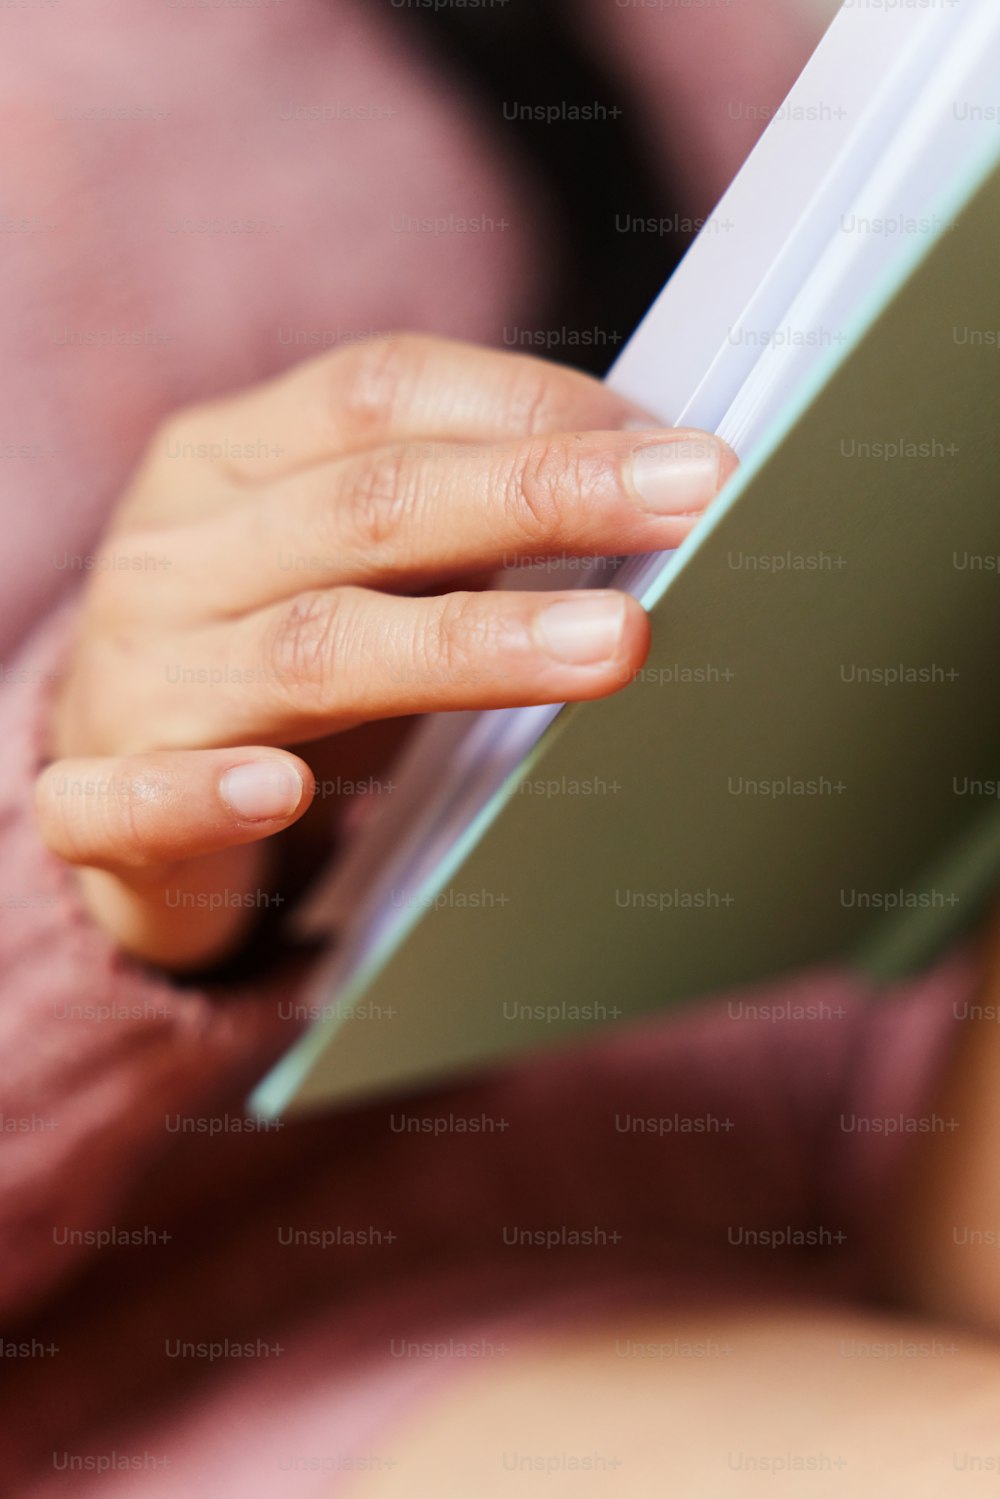 a close up of a person holding a book